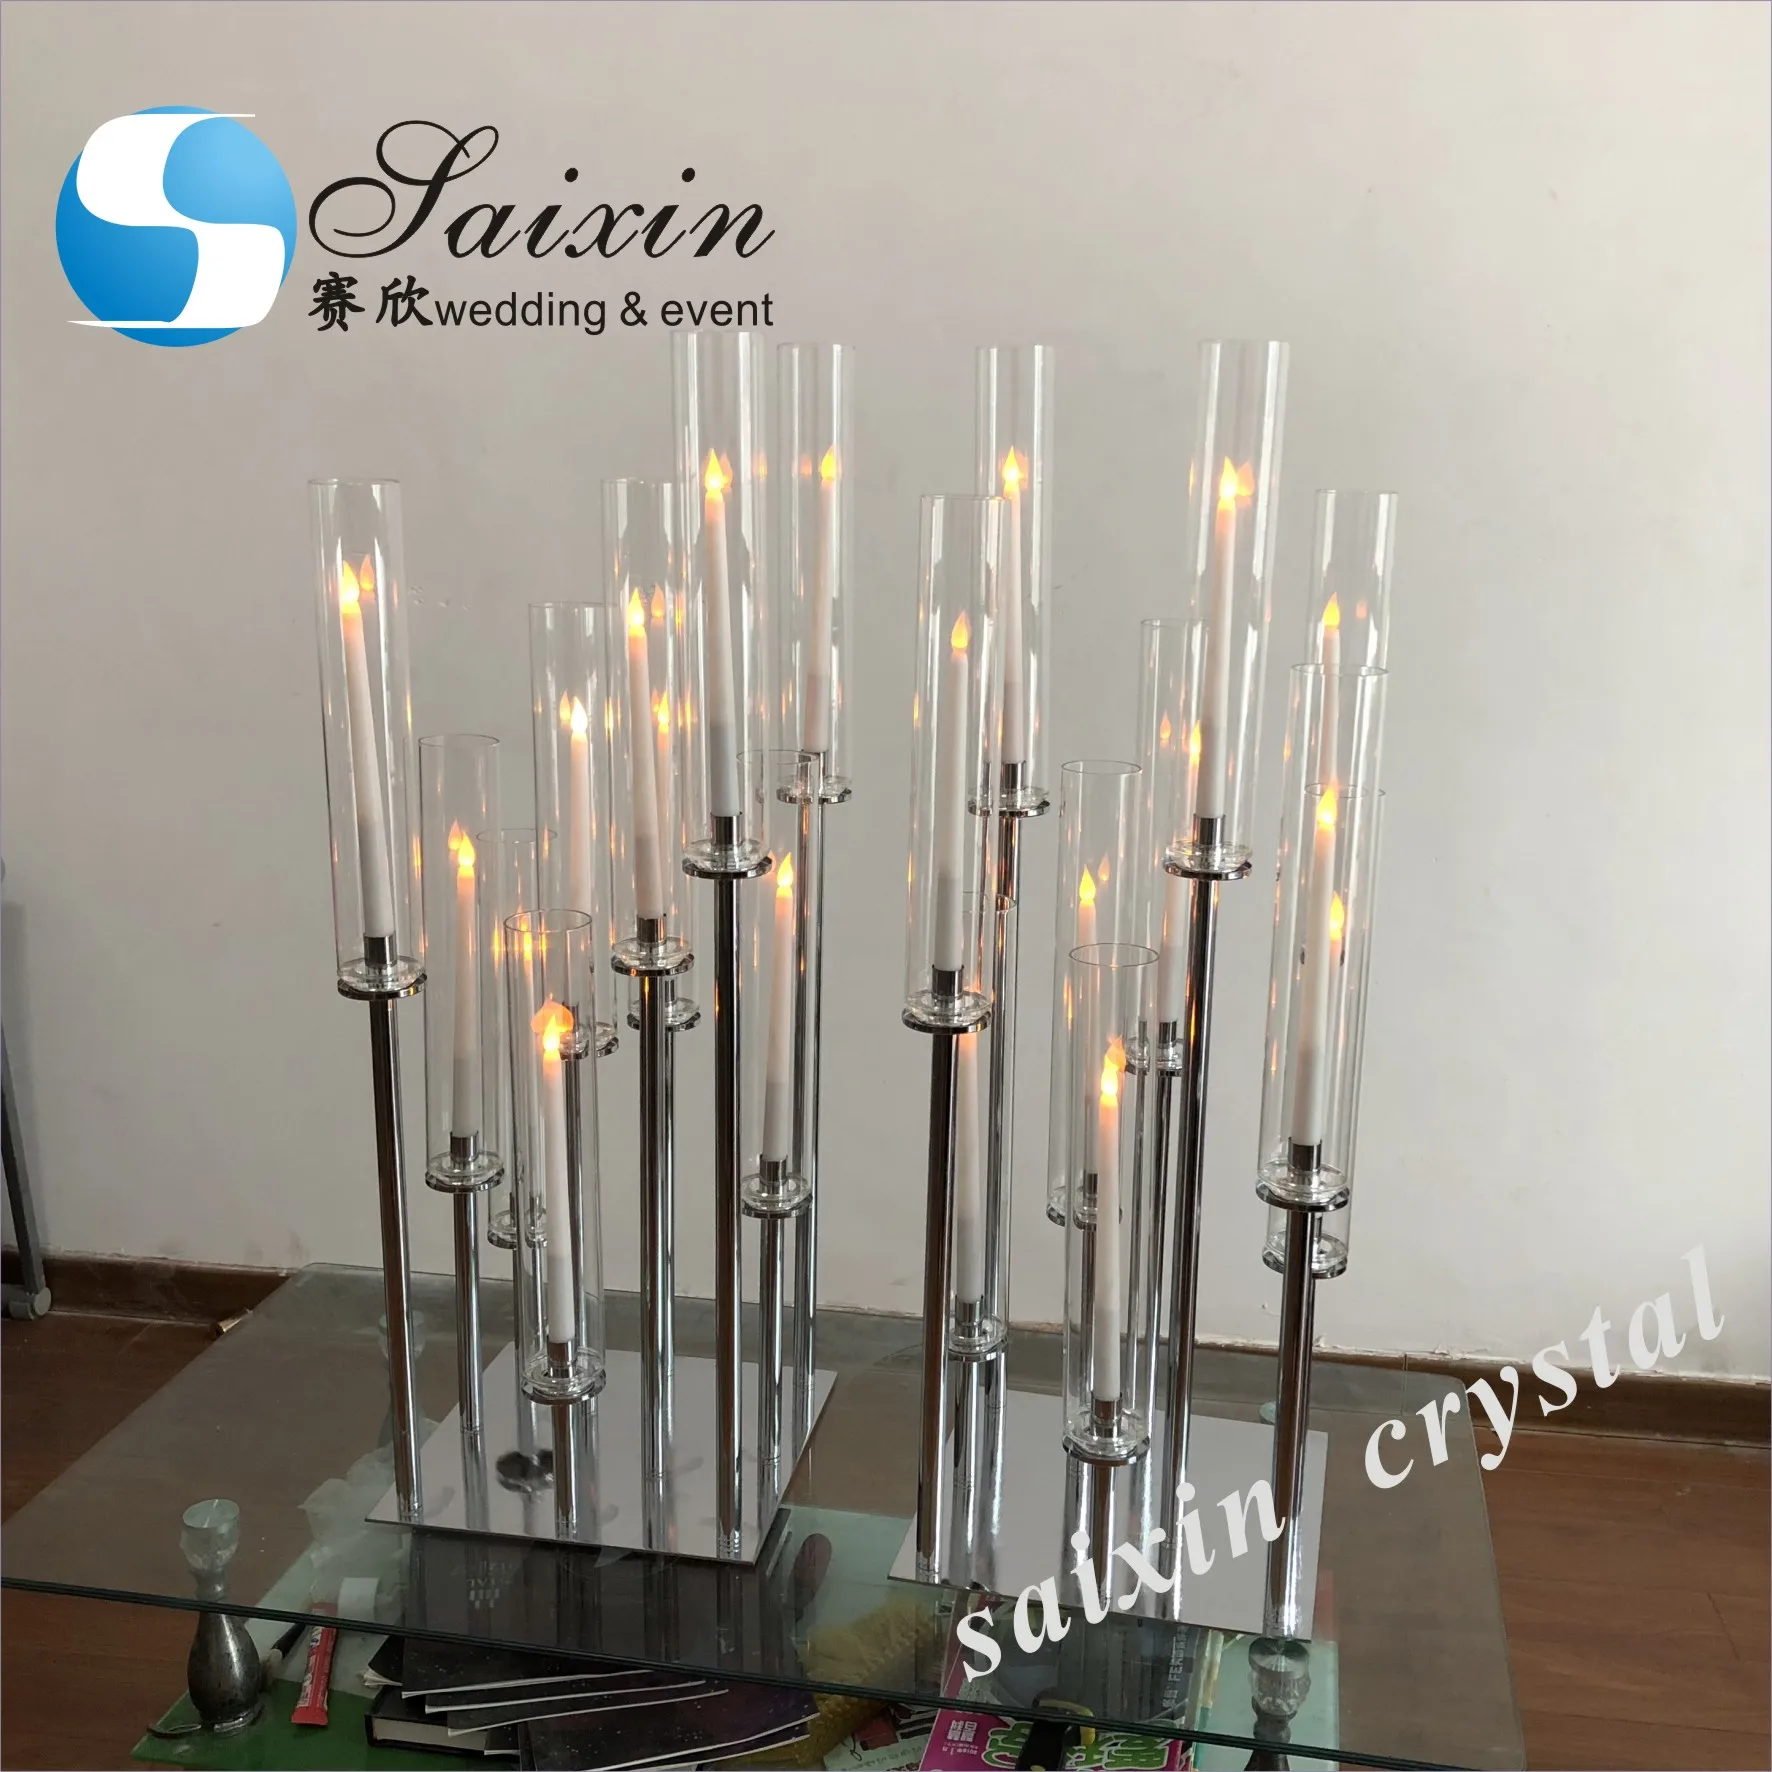 glass and silver candle holders